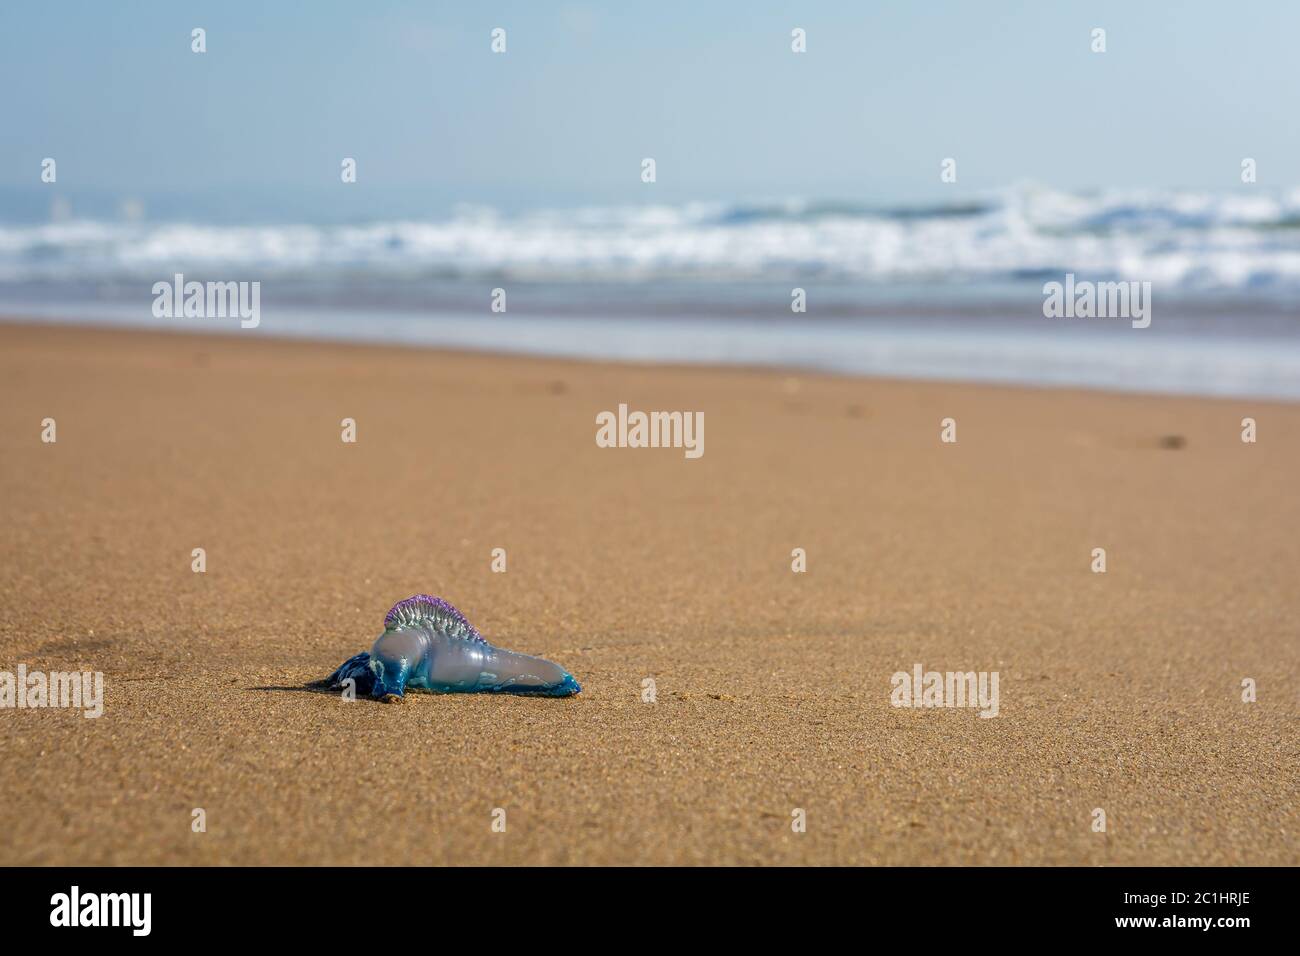 Single Man-o-War on a beach with the breakers in the background Stock Photo